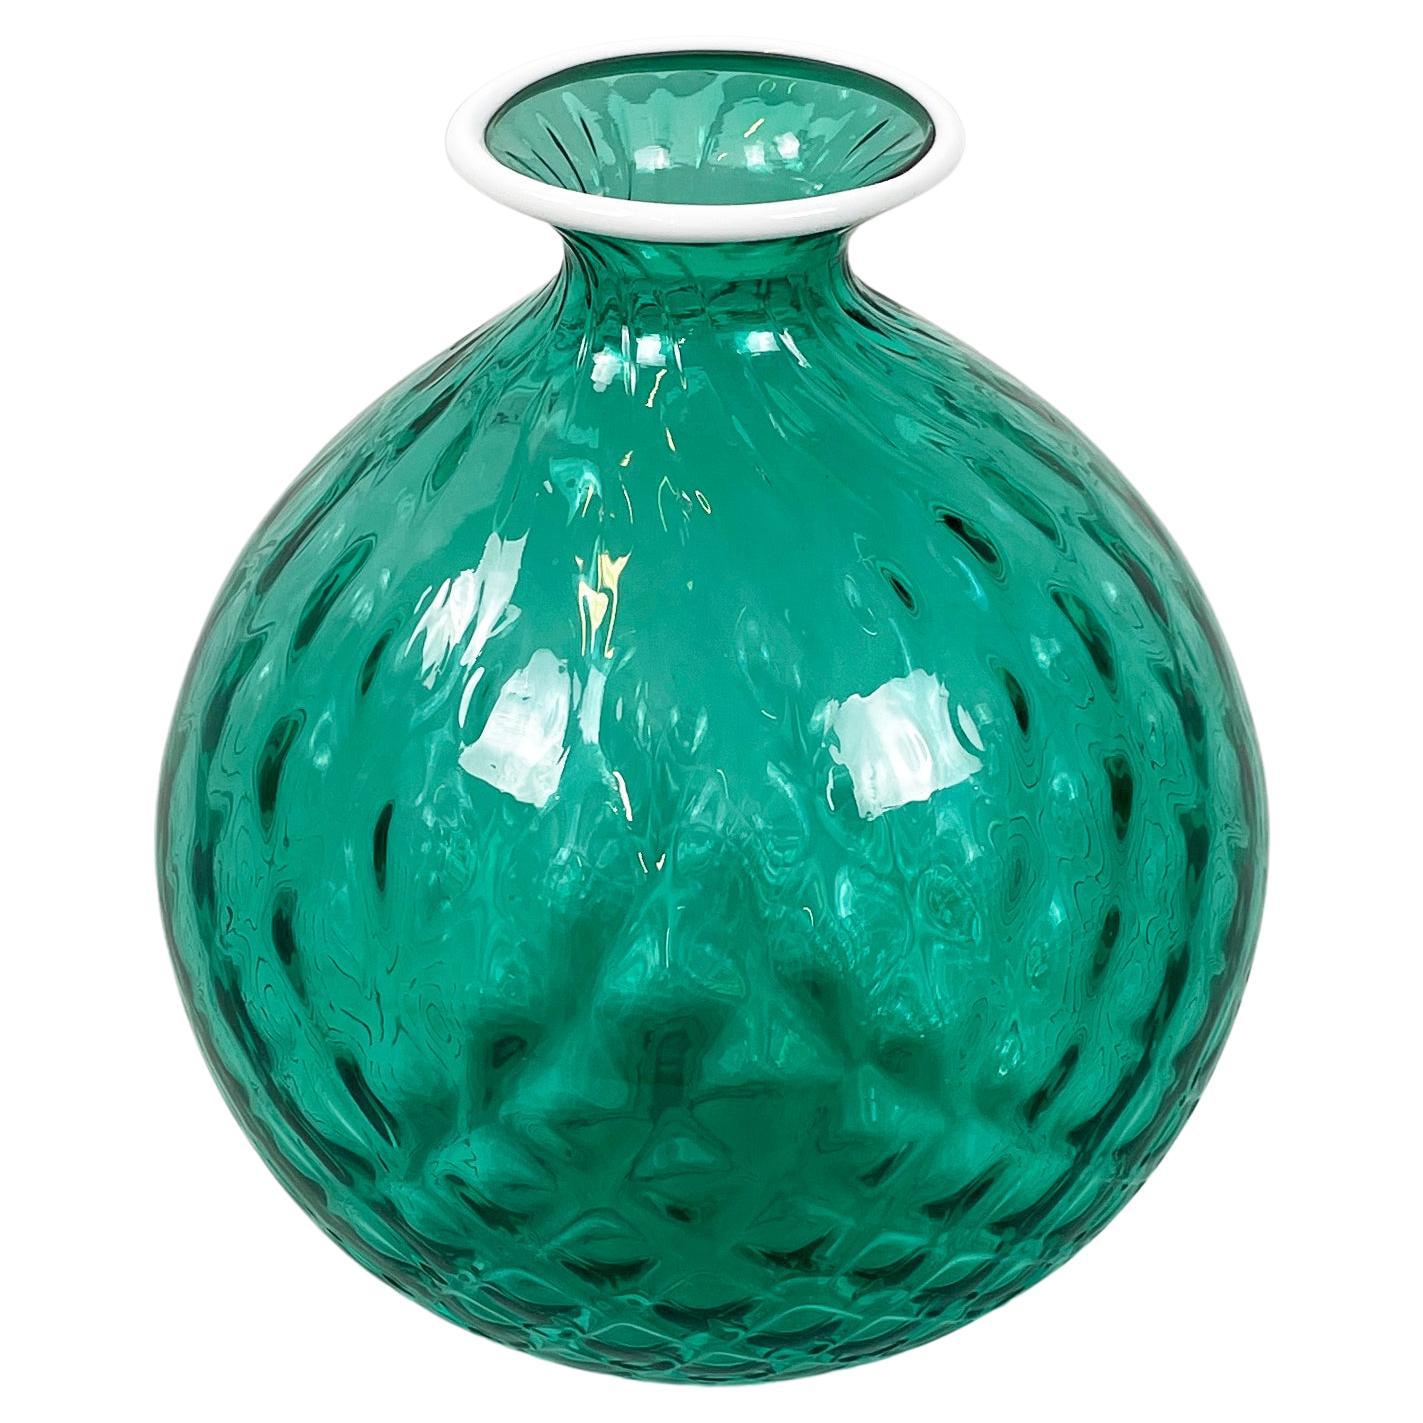 Italian modern round vase in green and white Murano glass by Venini 1990s For Sale